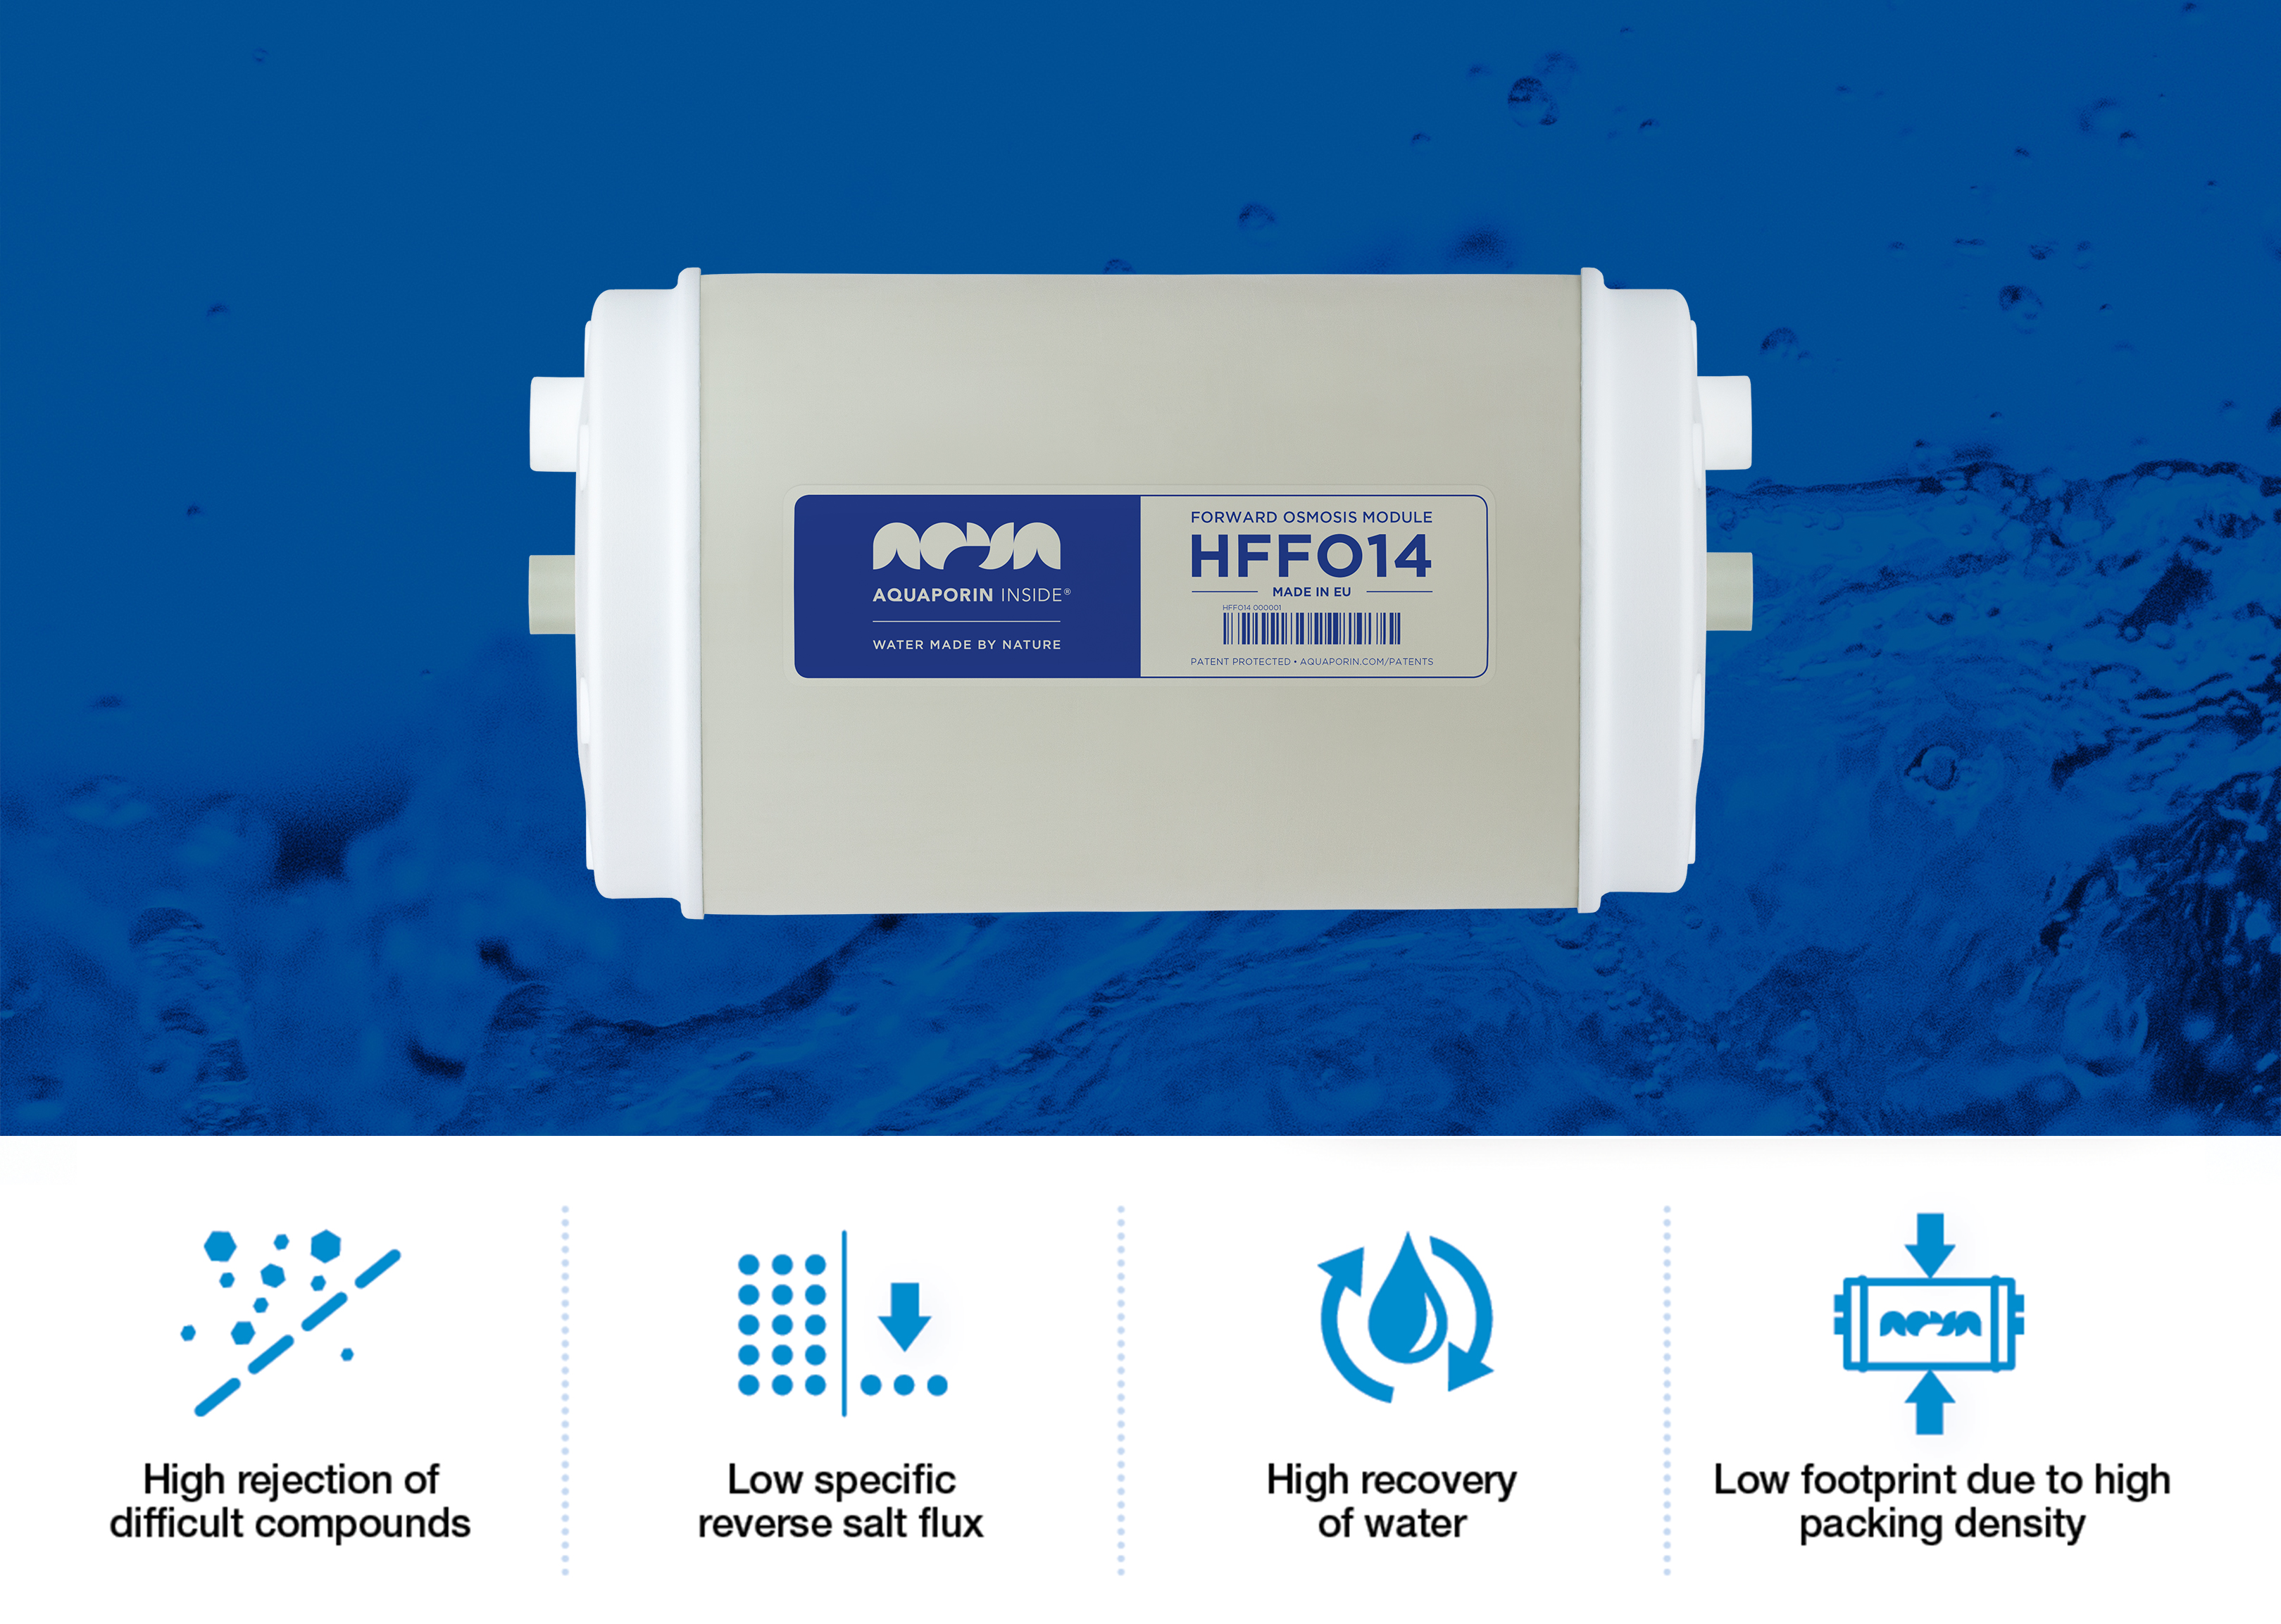 The new HFFO14 delivers six times more capacity than the current HFFO2 module.